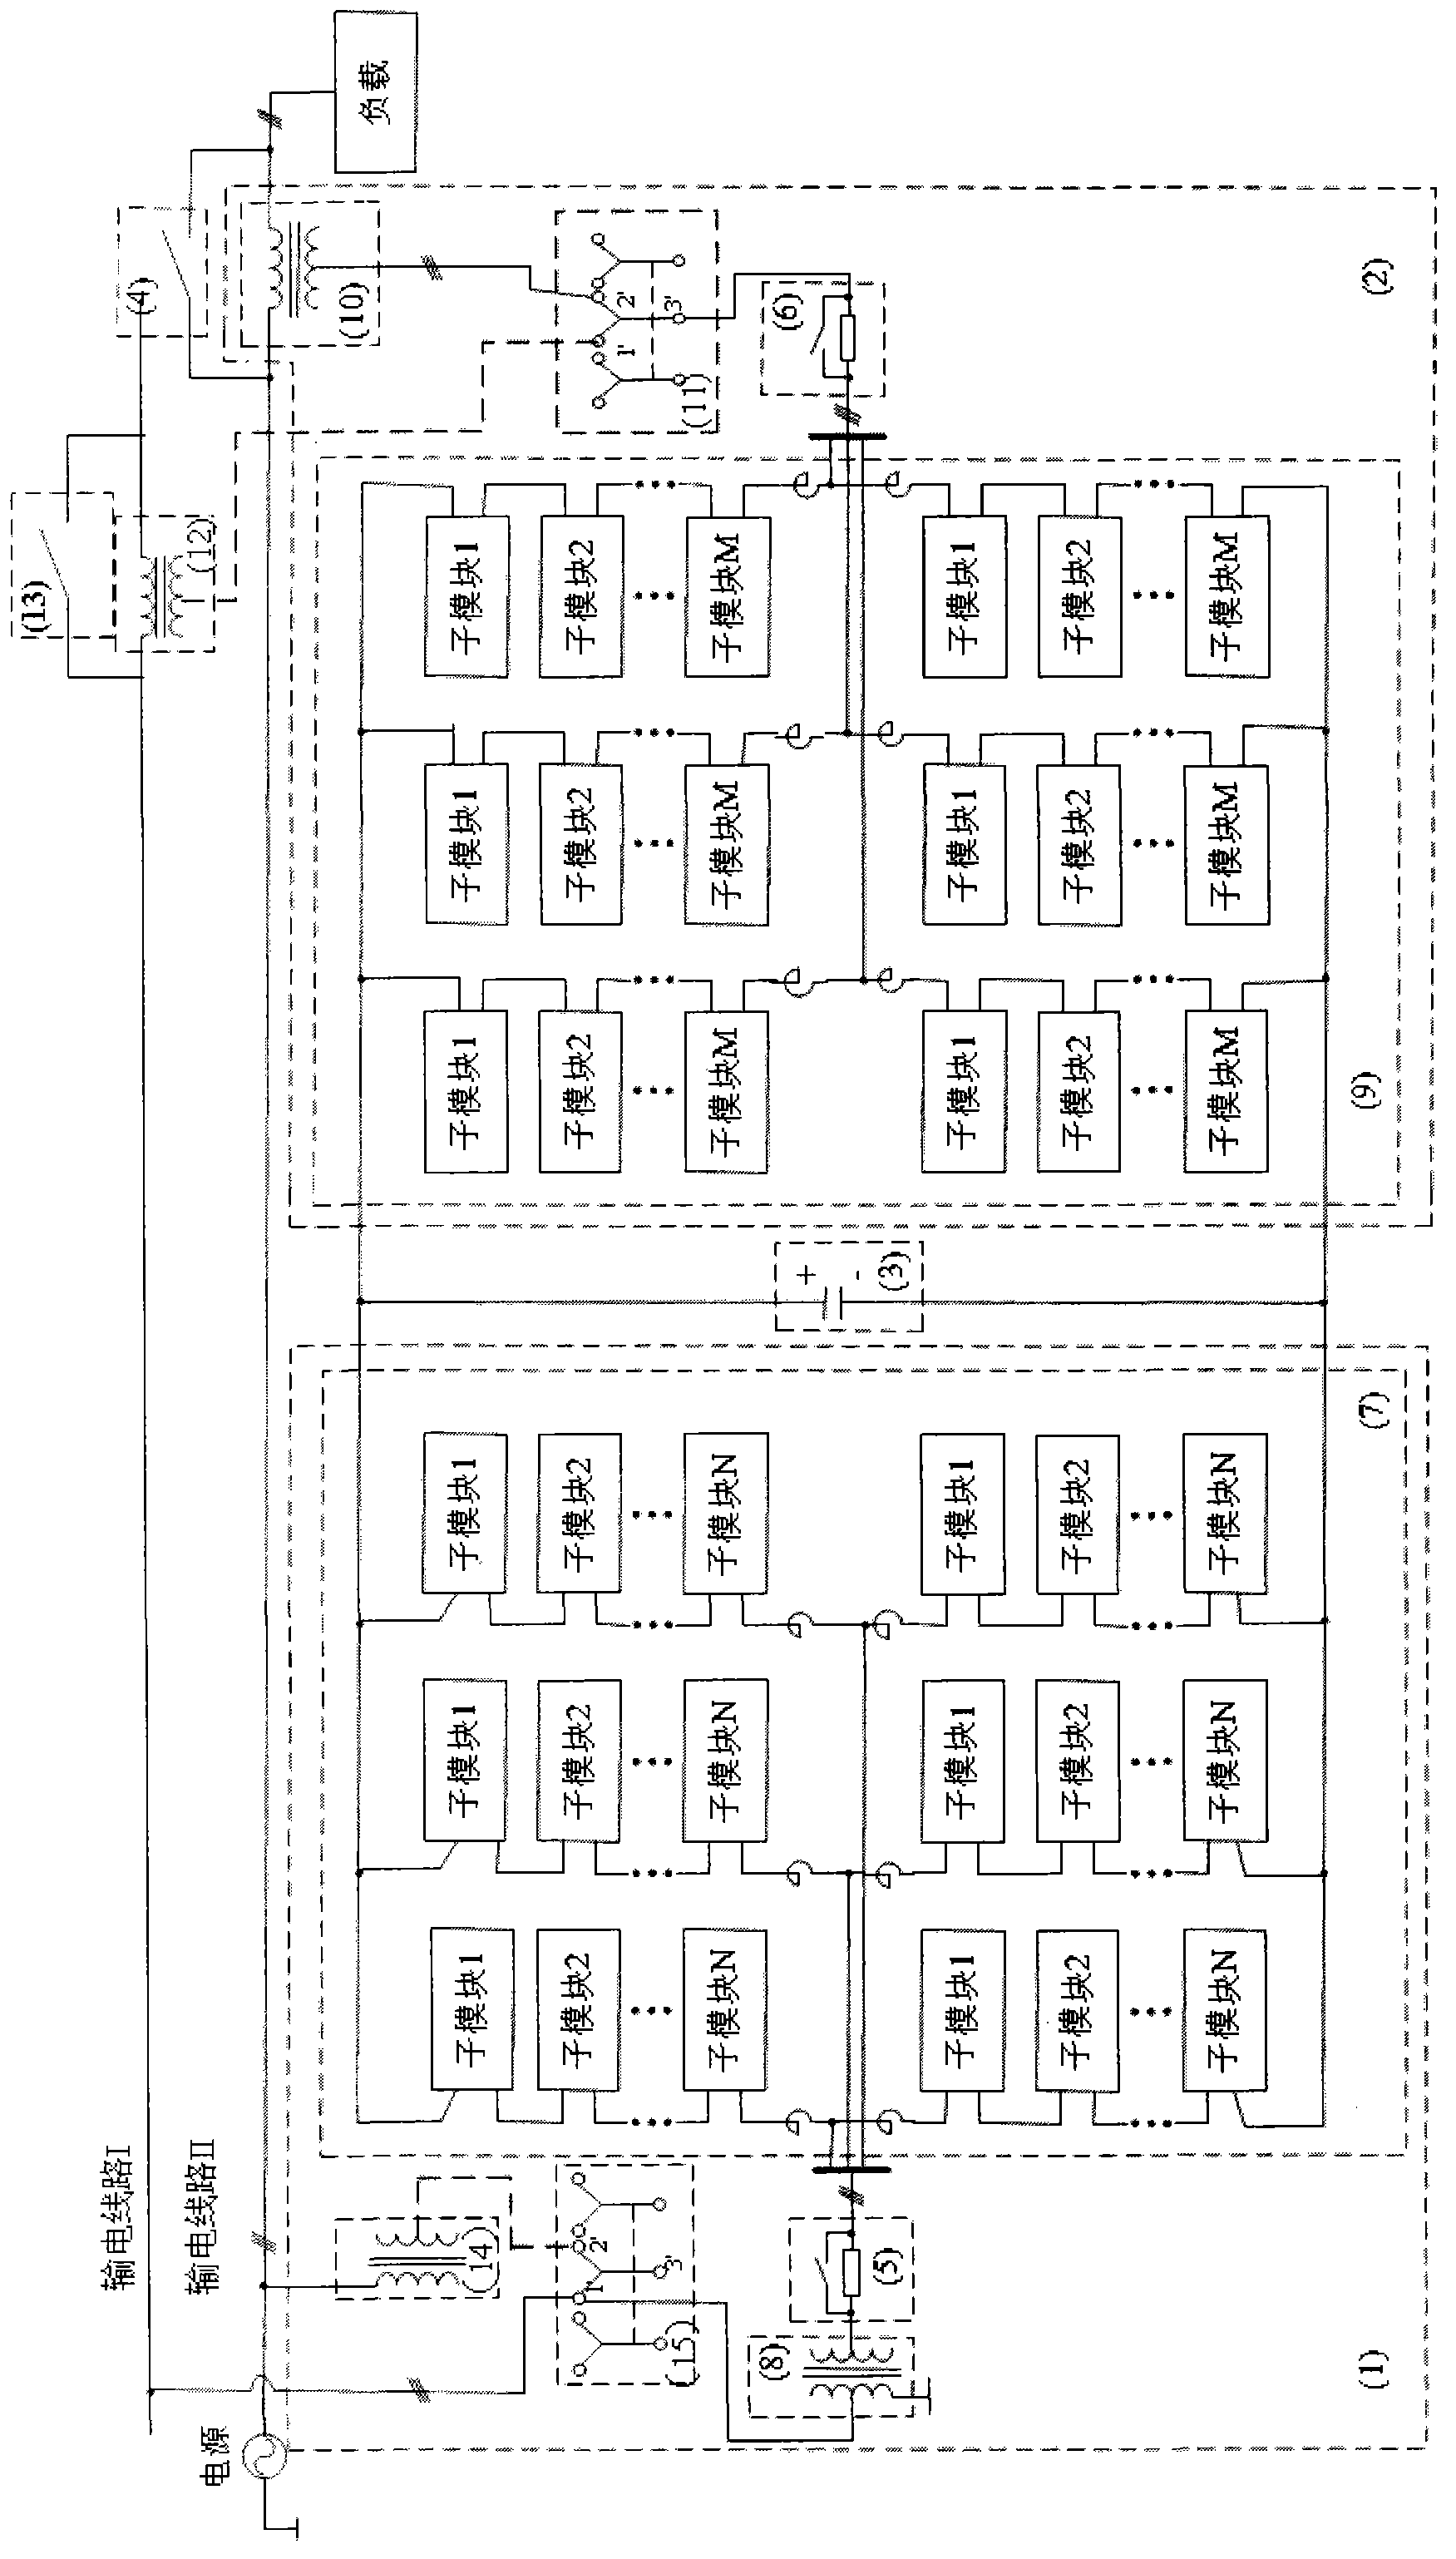 Convertible static compensator provided with modular multilevel converter structure